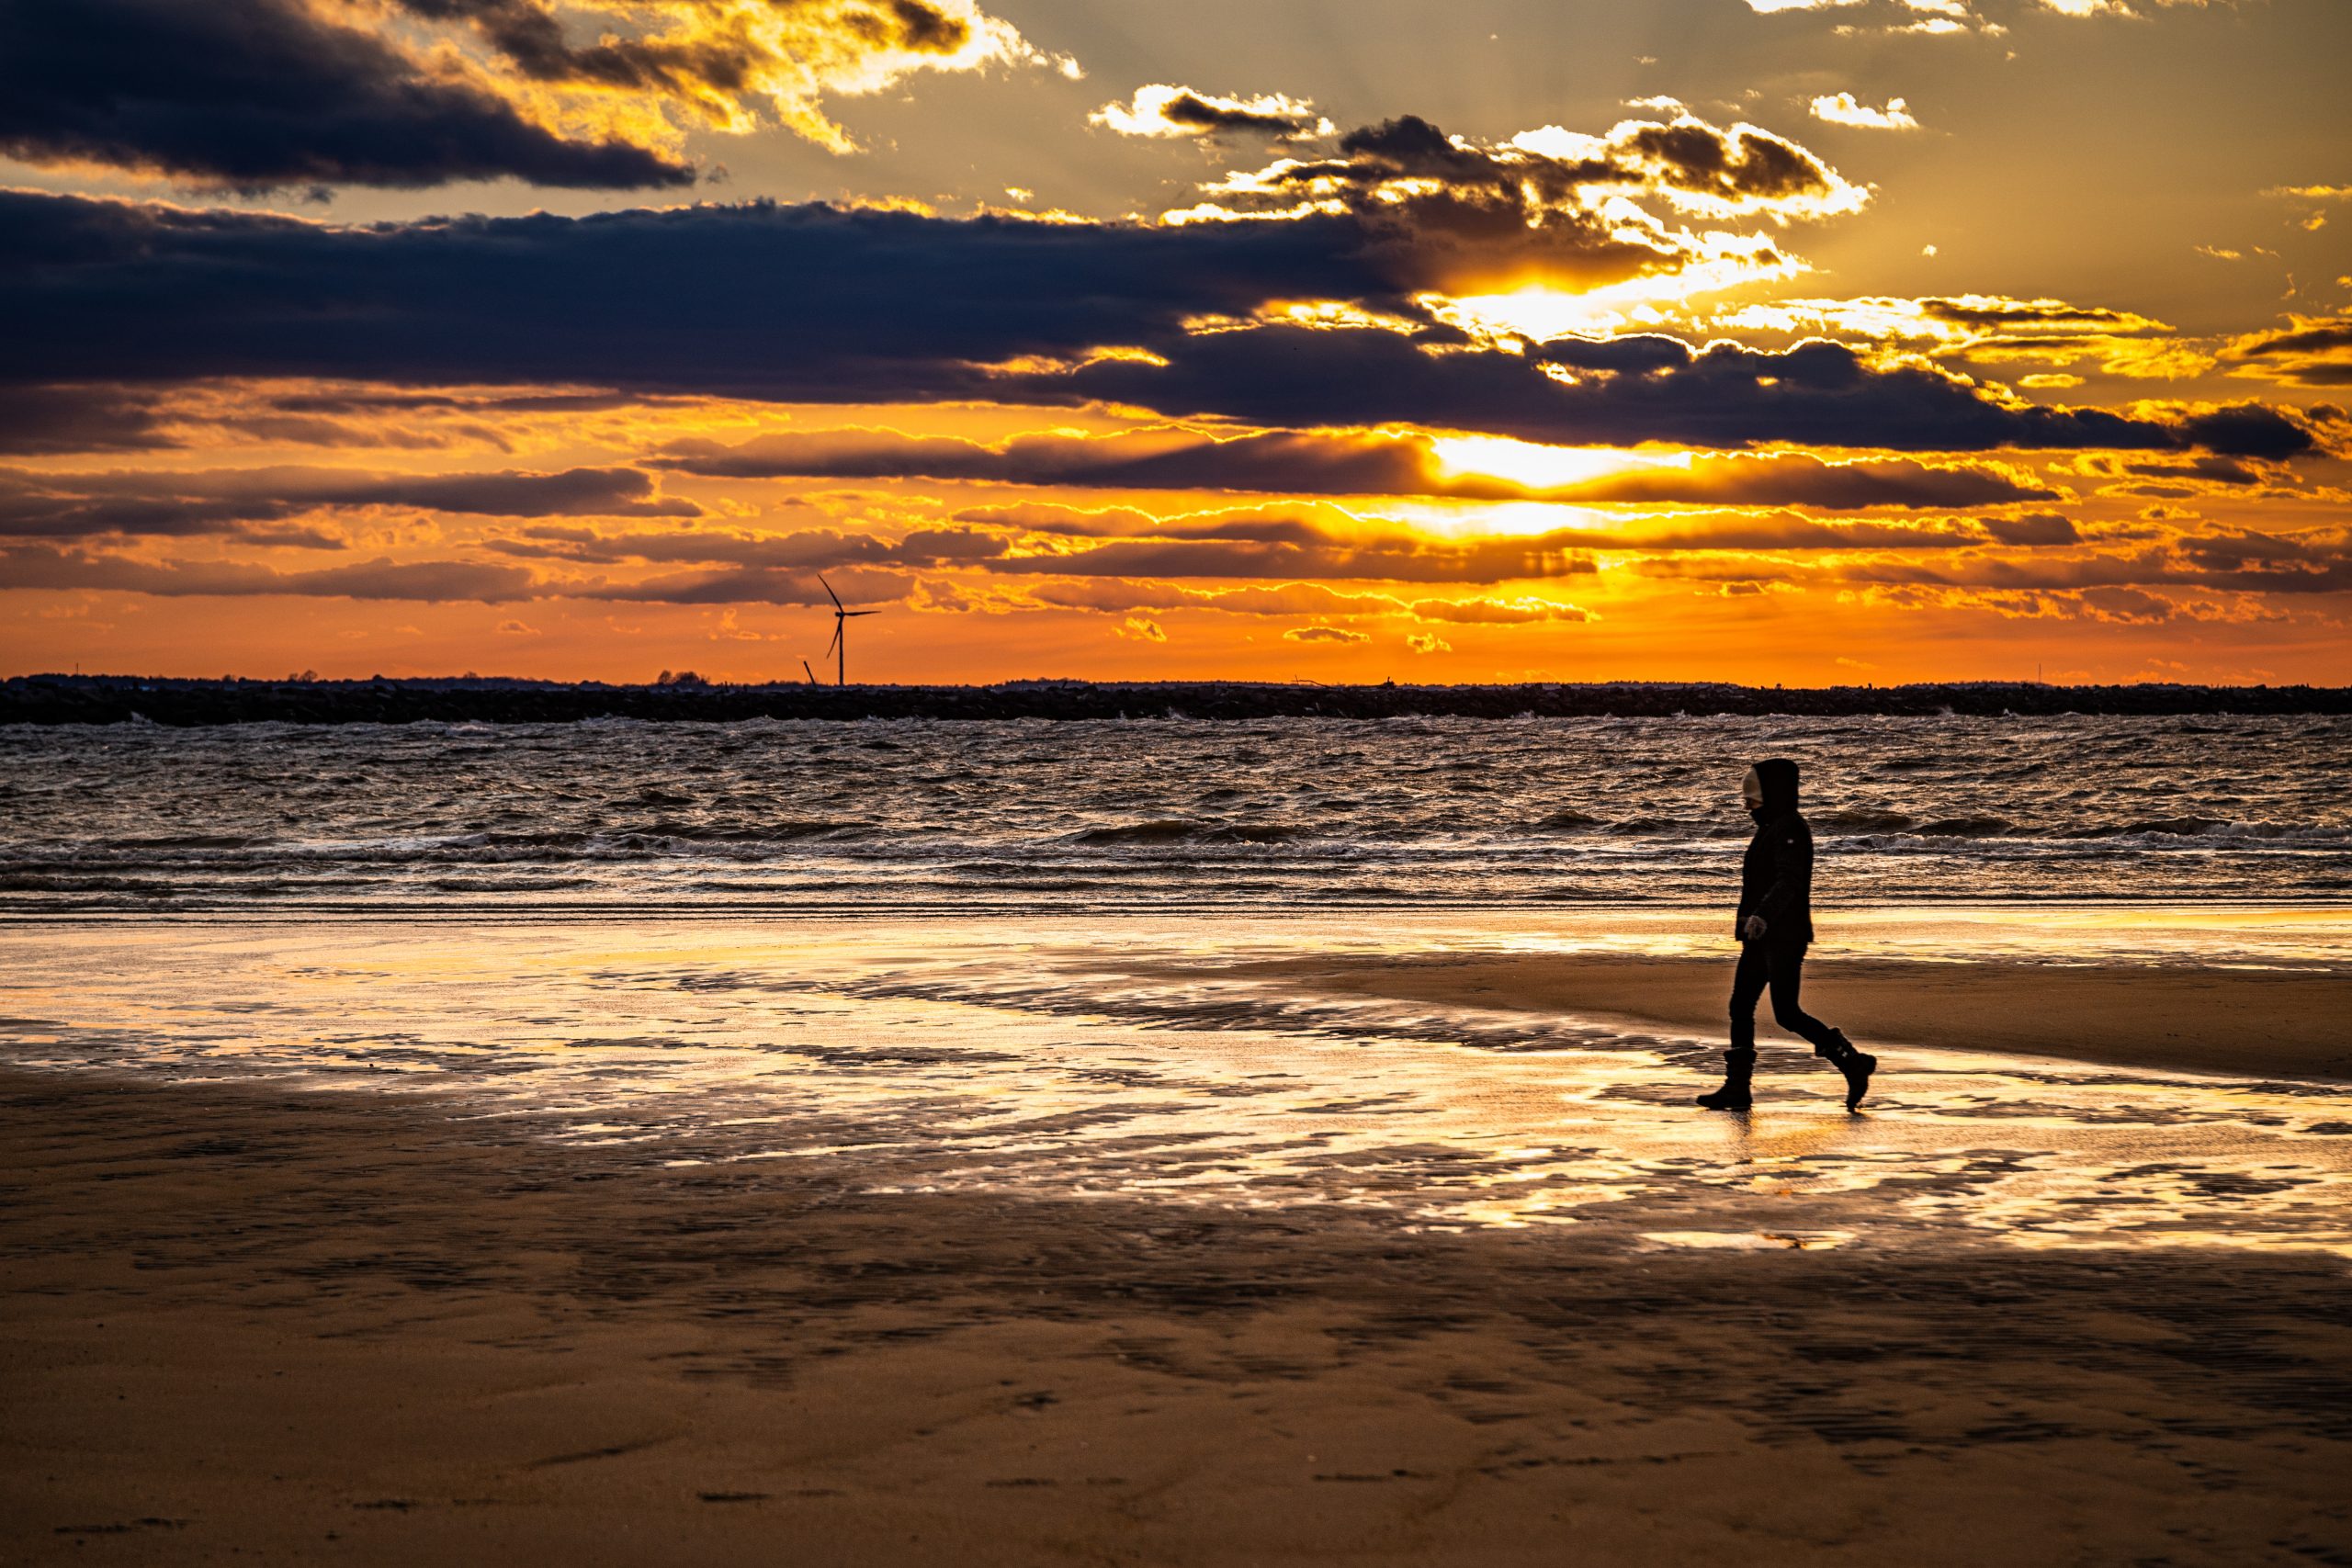 A photo of a person walking from the right side of the frame to the left on a beach with wet sand and a setting sun at The Point in Cape Henlopen State Park.